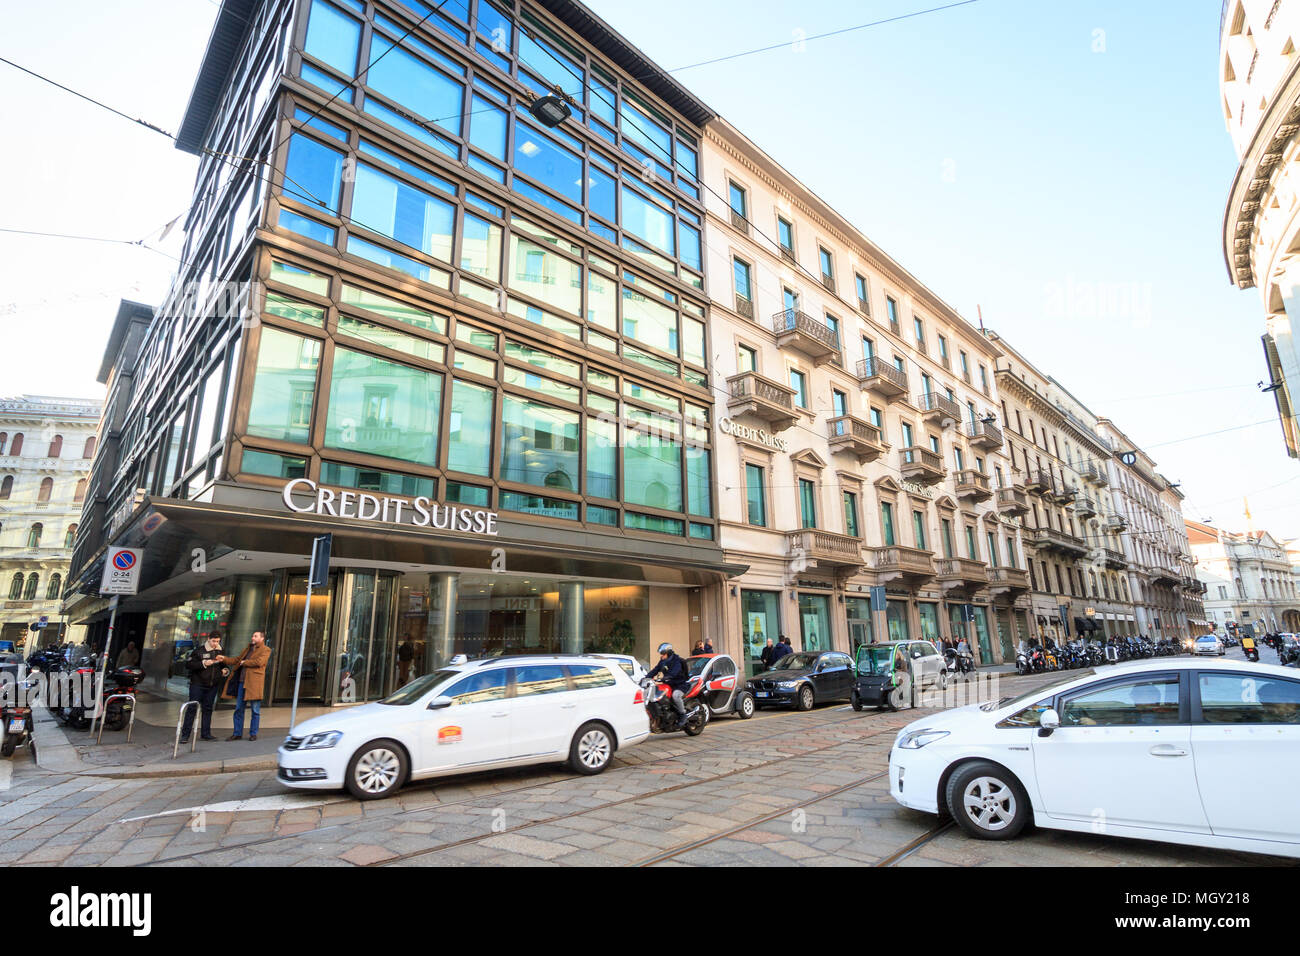 Milan, March 2018: Windows and signs of Credit Suisse, in fashion and design capital of the world, on March 2018 in Milan, Italy Stock Photo